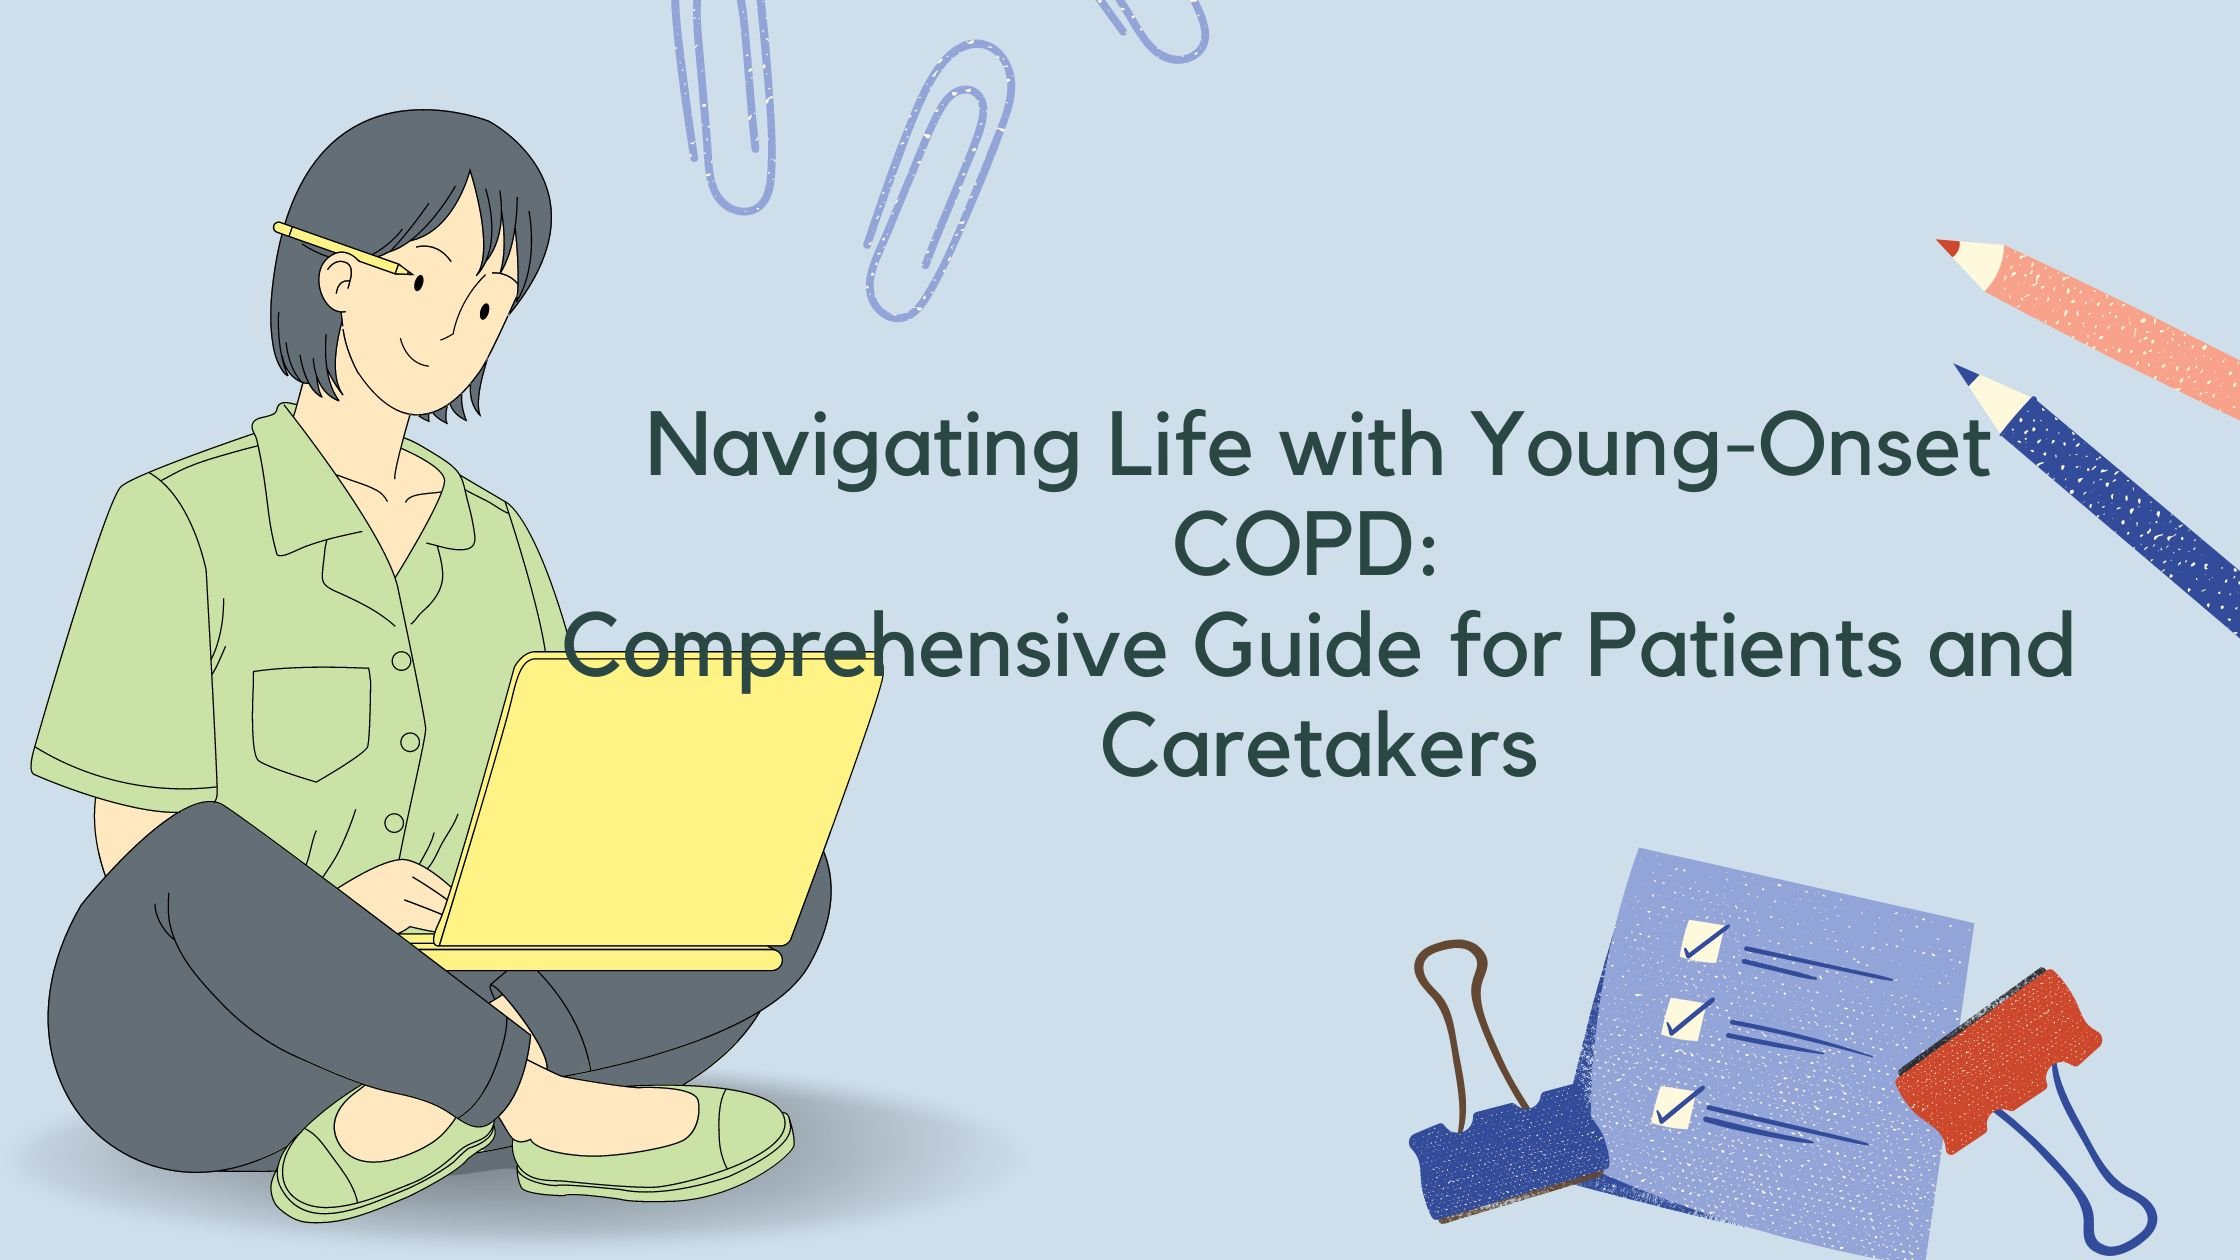 Navigating Life with Young-Onset COPD Comprehensive Guide for Patients and Caretakers